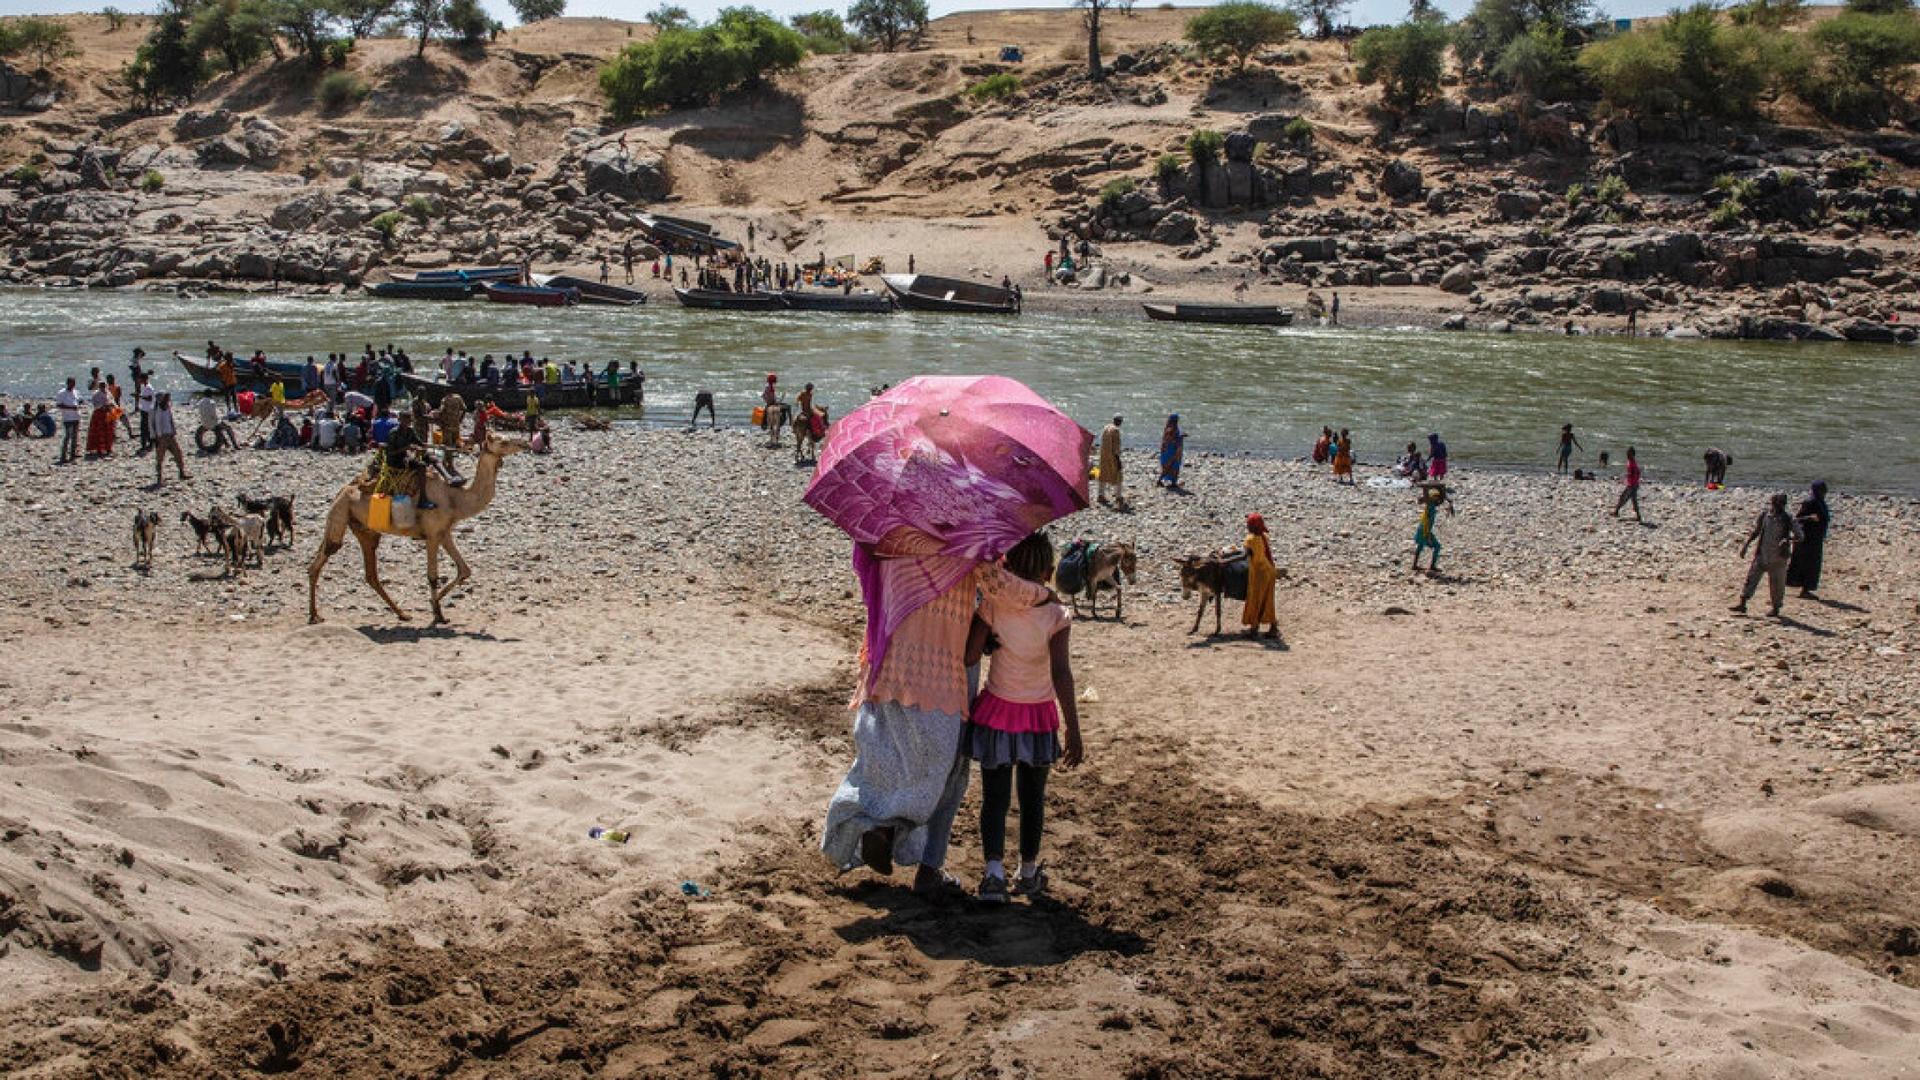 Refugees who fled the conflict in Ethiopia's Tigray region arrive on the banks of the Tekeze River on the Sudan-Ethiopia border, in Hamdayet, eastern Sudan, Nov. 21, 2020. Huge unknowns persist in the deadly conflict, but details of the involvement of nei